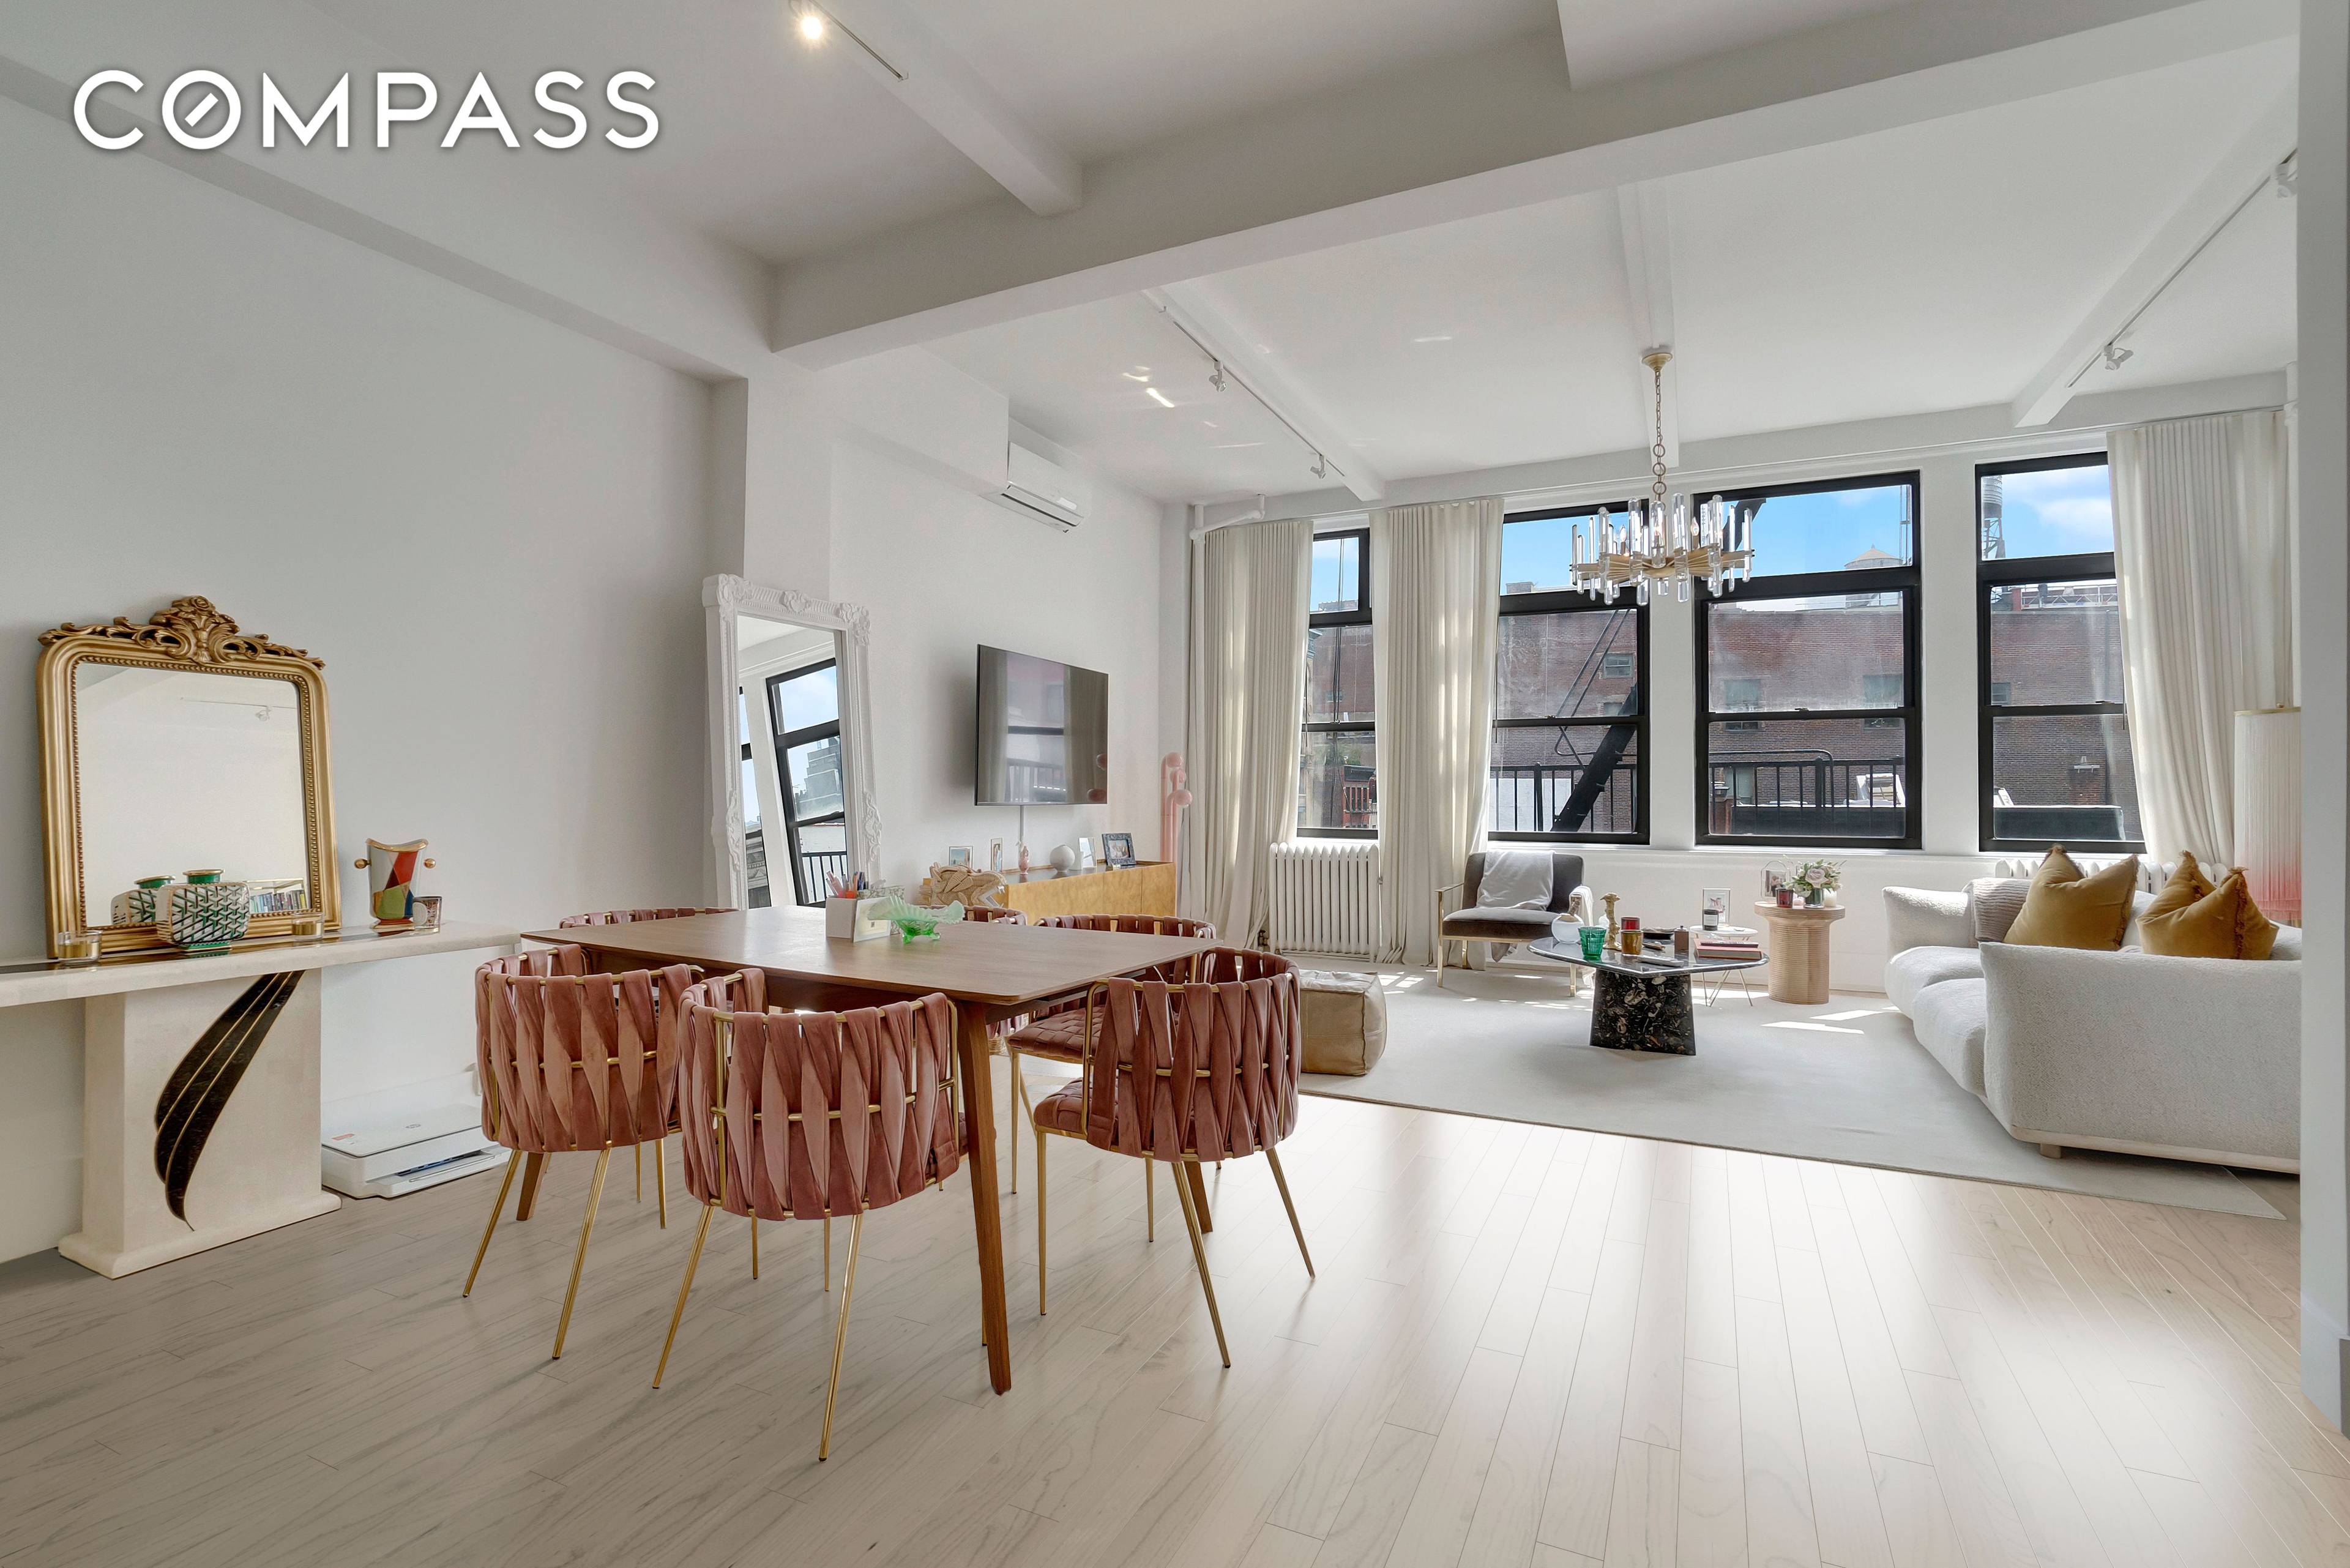 Welcome to 145 Spring Street, Unit 3A ; an expansive and breathtaking 3 bed 2 bath in the heart of SoHo.